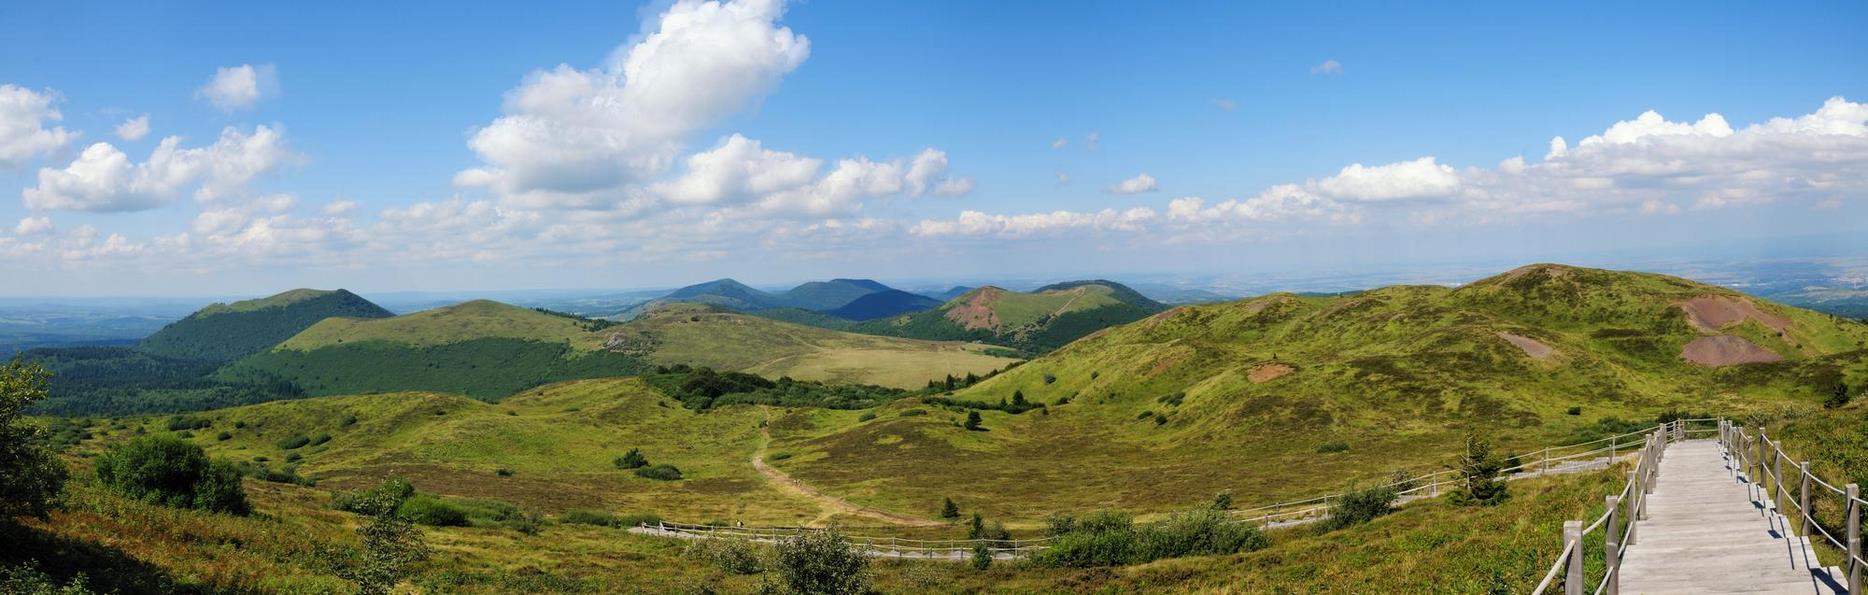 Panoramic view of the Puy de Dome - Auvergne